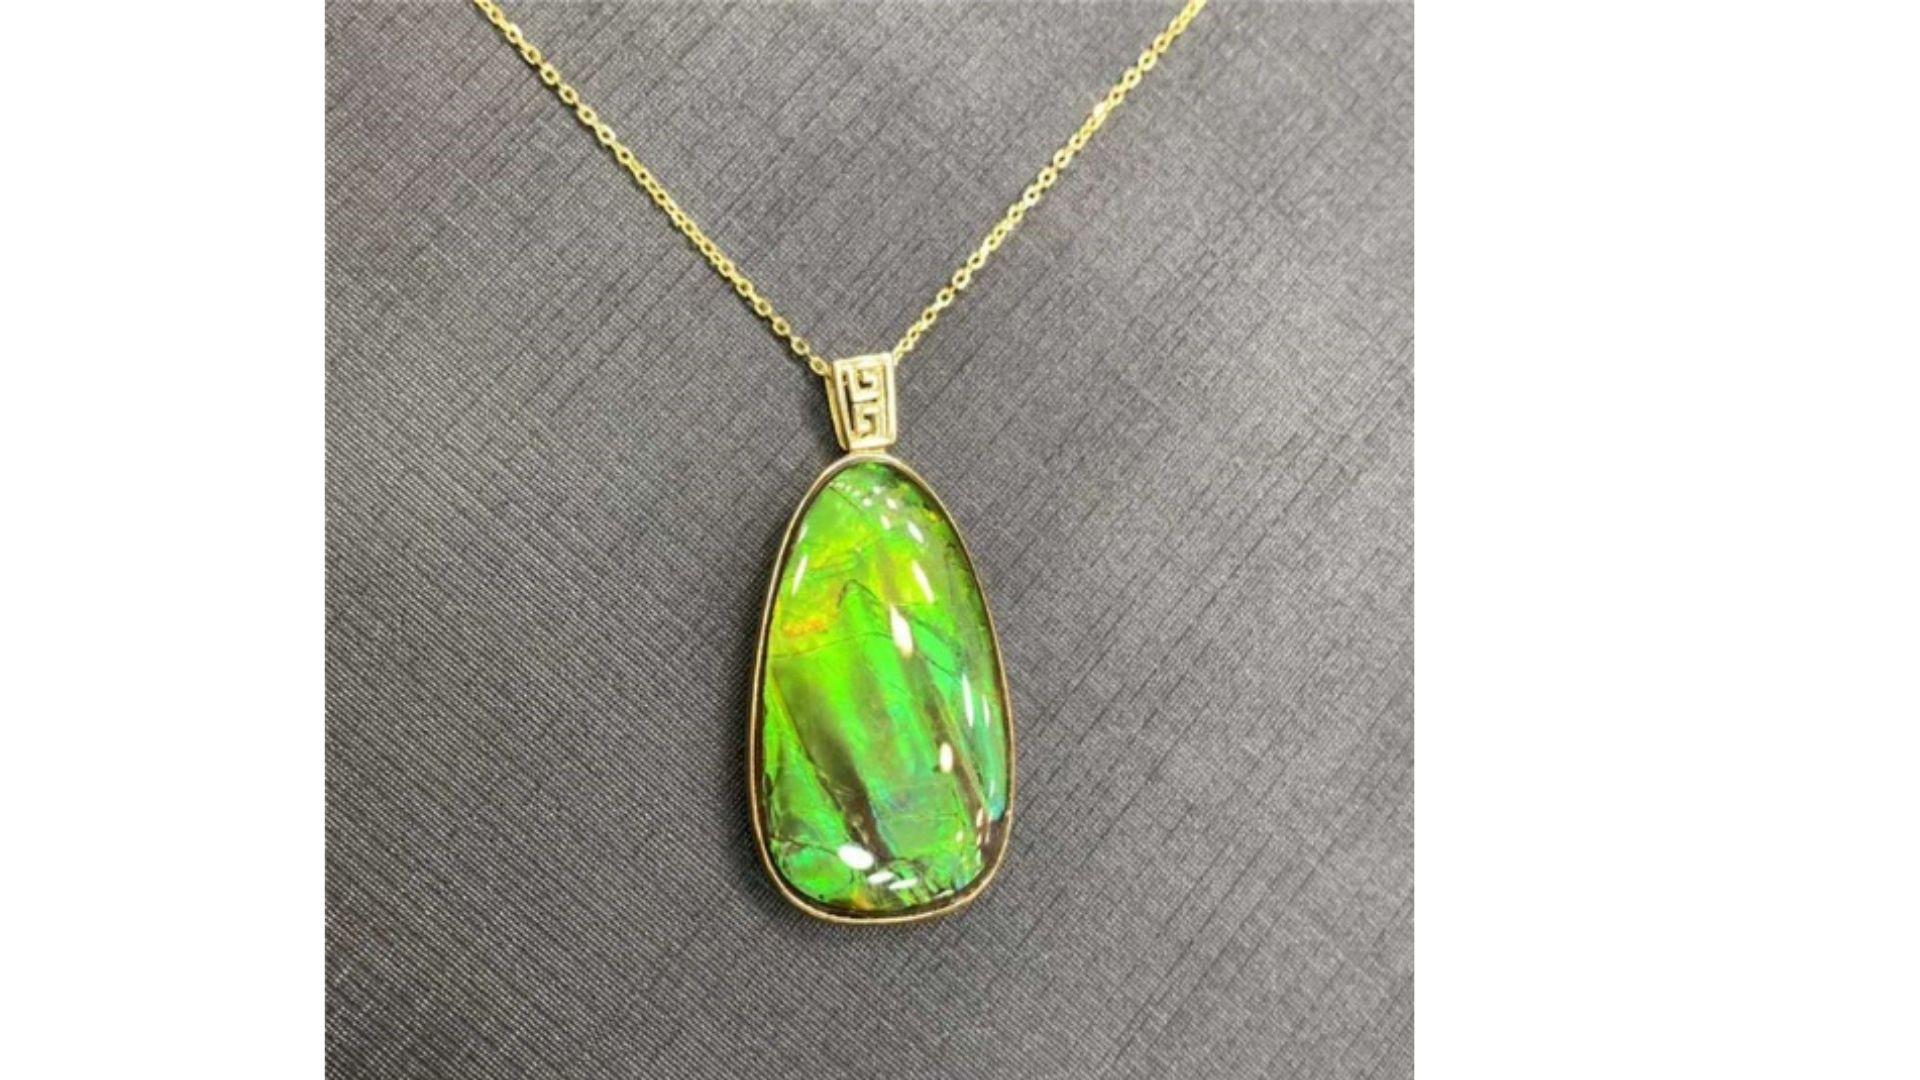 
Ammolite is a rare iridescent gemstone from a fossilized extint sea creature known as a ammountes. It shows off bright colors yellow orange etc

Found only in the Bearpaw formation that extends from Alberta to Saskatchewan in Canada and to Montana